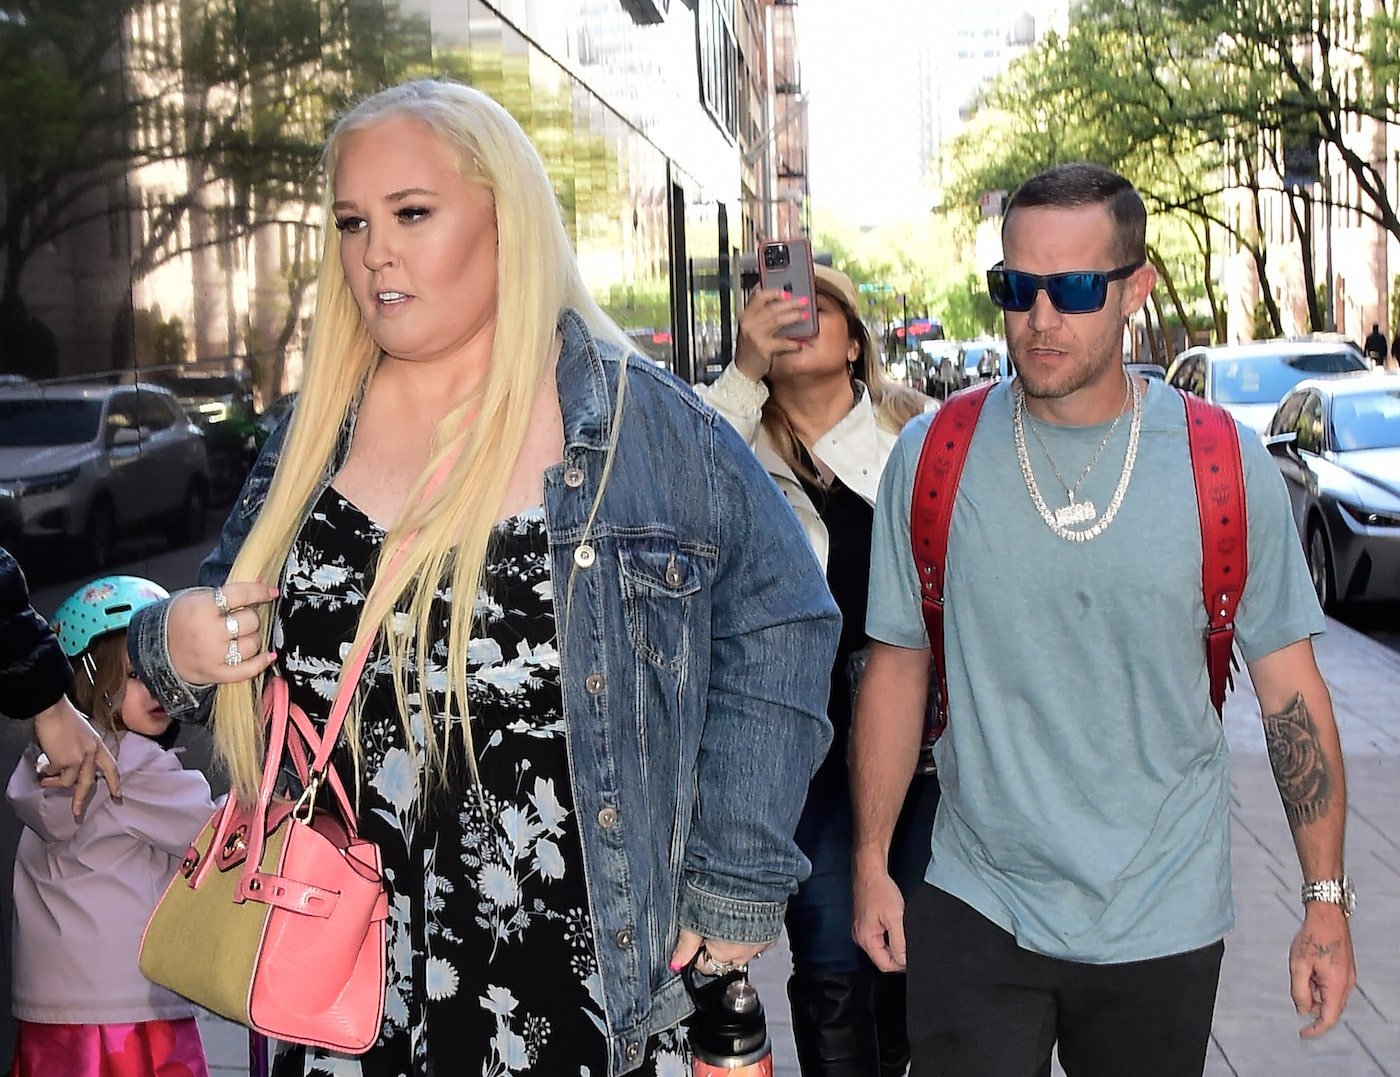 Mama June Shannon and Justin Stroud walk down the street